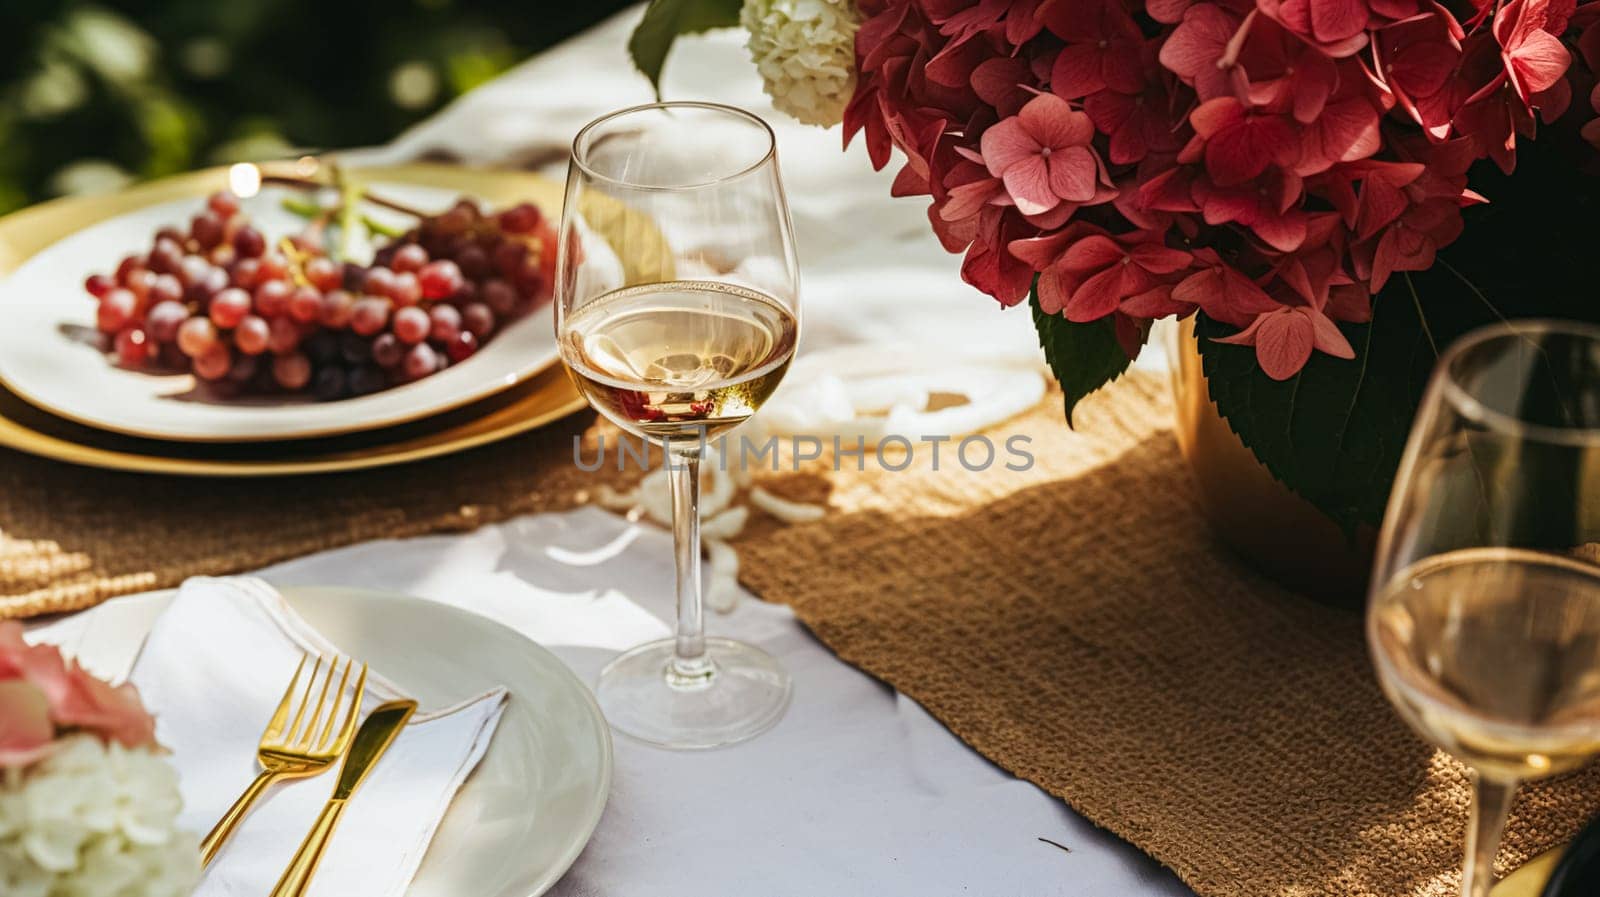 Wedding or formal dinner holiday celebration tablescape with hydrangea flowers in the English countryside garden, table setting and wine, floral table decor for family dinner party, home styling by Anneleven